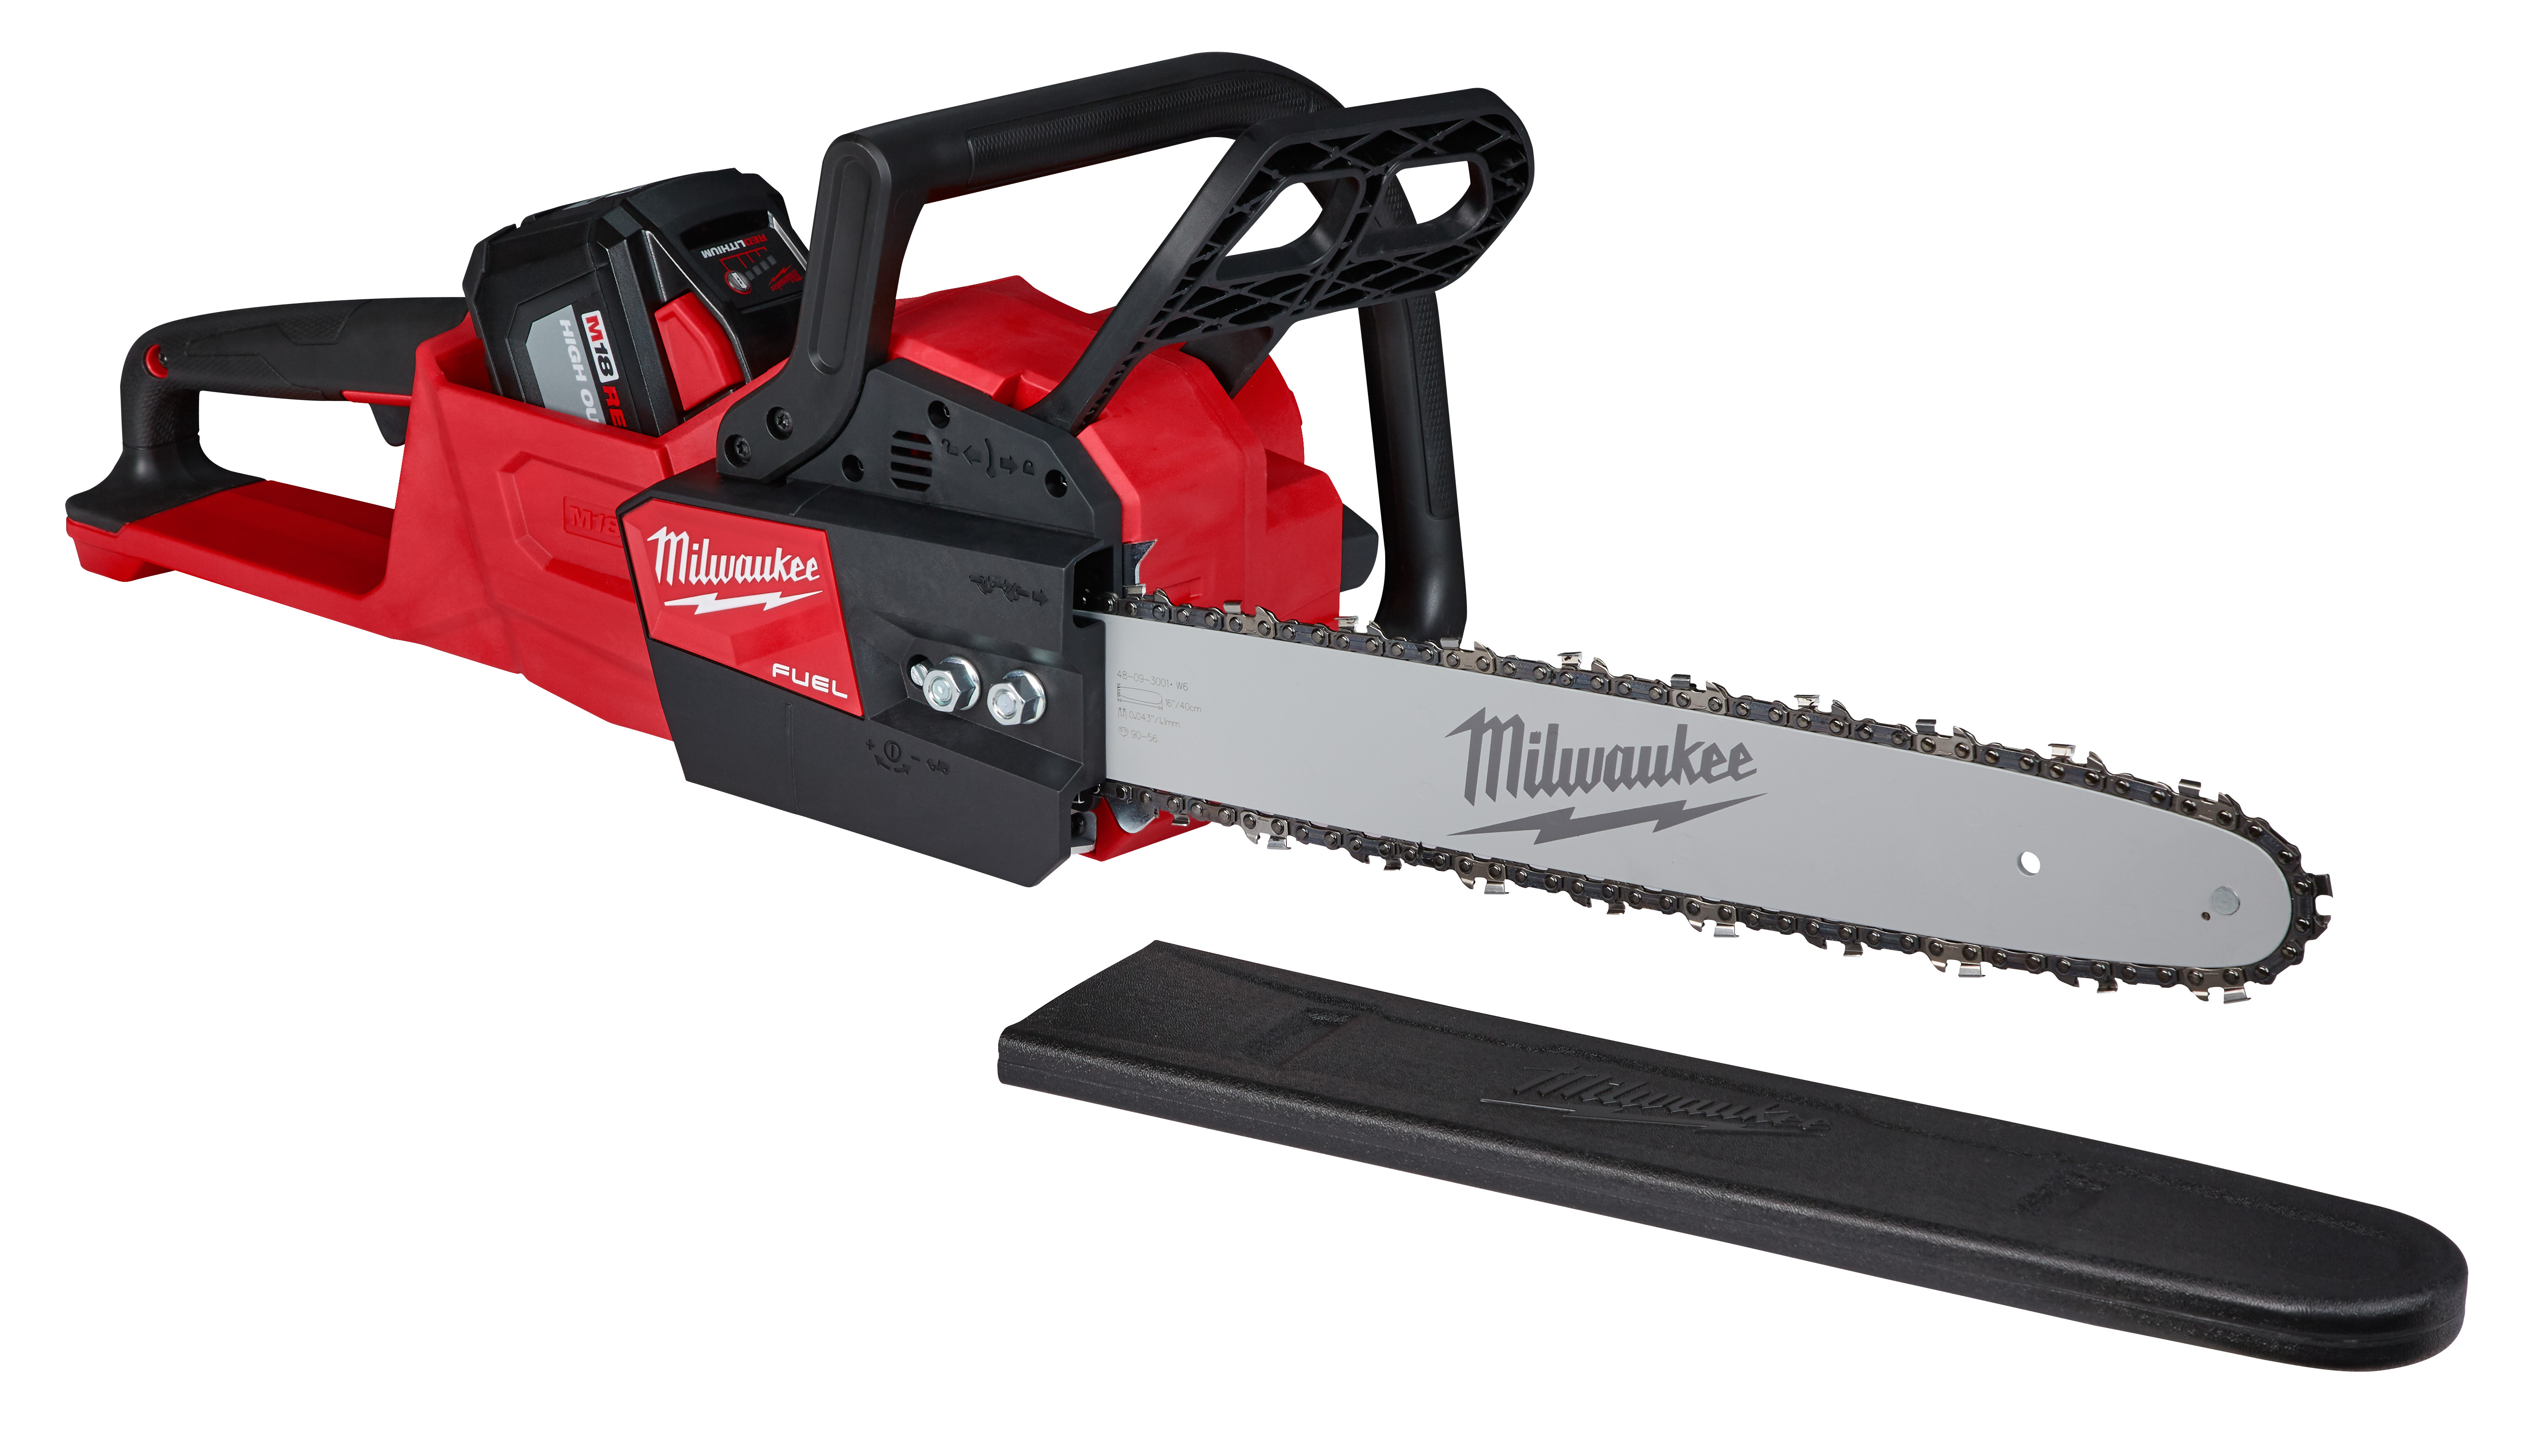 The Milwaukee M18 FUEL™ 16 in. Chainsaw delivers the power to cut hardwoods, cuts faster than gas, and delivers up to 150 cuts per charge. The unit is designed to meet the performance, durability and ergonomic needs of professional landscape maintenance, power utility, and the installed M18 user. The POWERSTATE™ brushless motor maintains speed under heavy loads without bogging down to outperform small gas engines and higher voltage systems. REDLINK Plus™ intelligence ensures maximum performance and protection from overload, overheating and over discharge. The M18™ REDLITHIUM™ HIGH OUTPUT™ HD12.0 battery delivers unmatched run-time in all applications. M18 FUEL™ technology allows the unit to reach full throttle in under 1 second providing ultimate control and productivity.